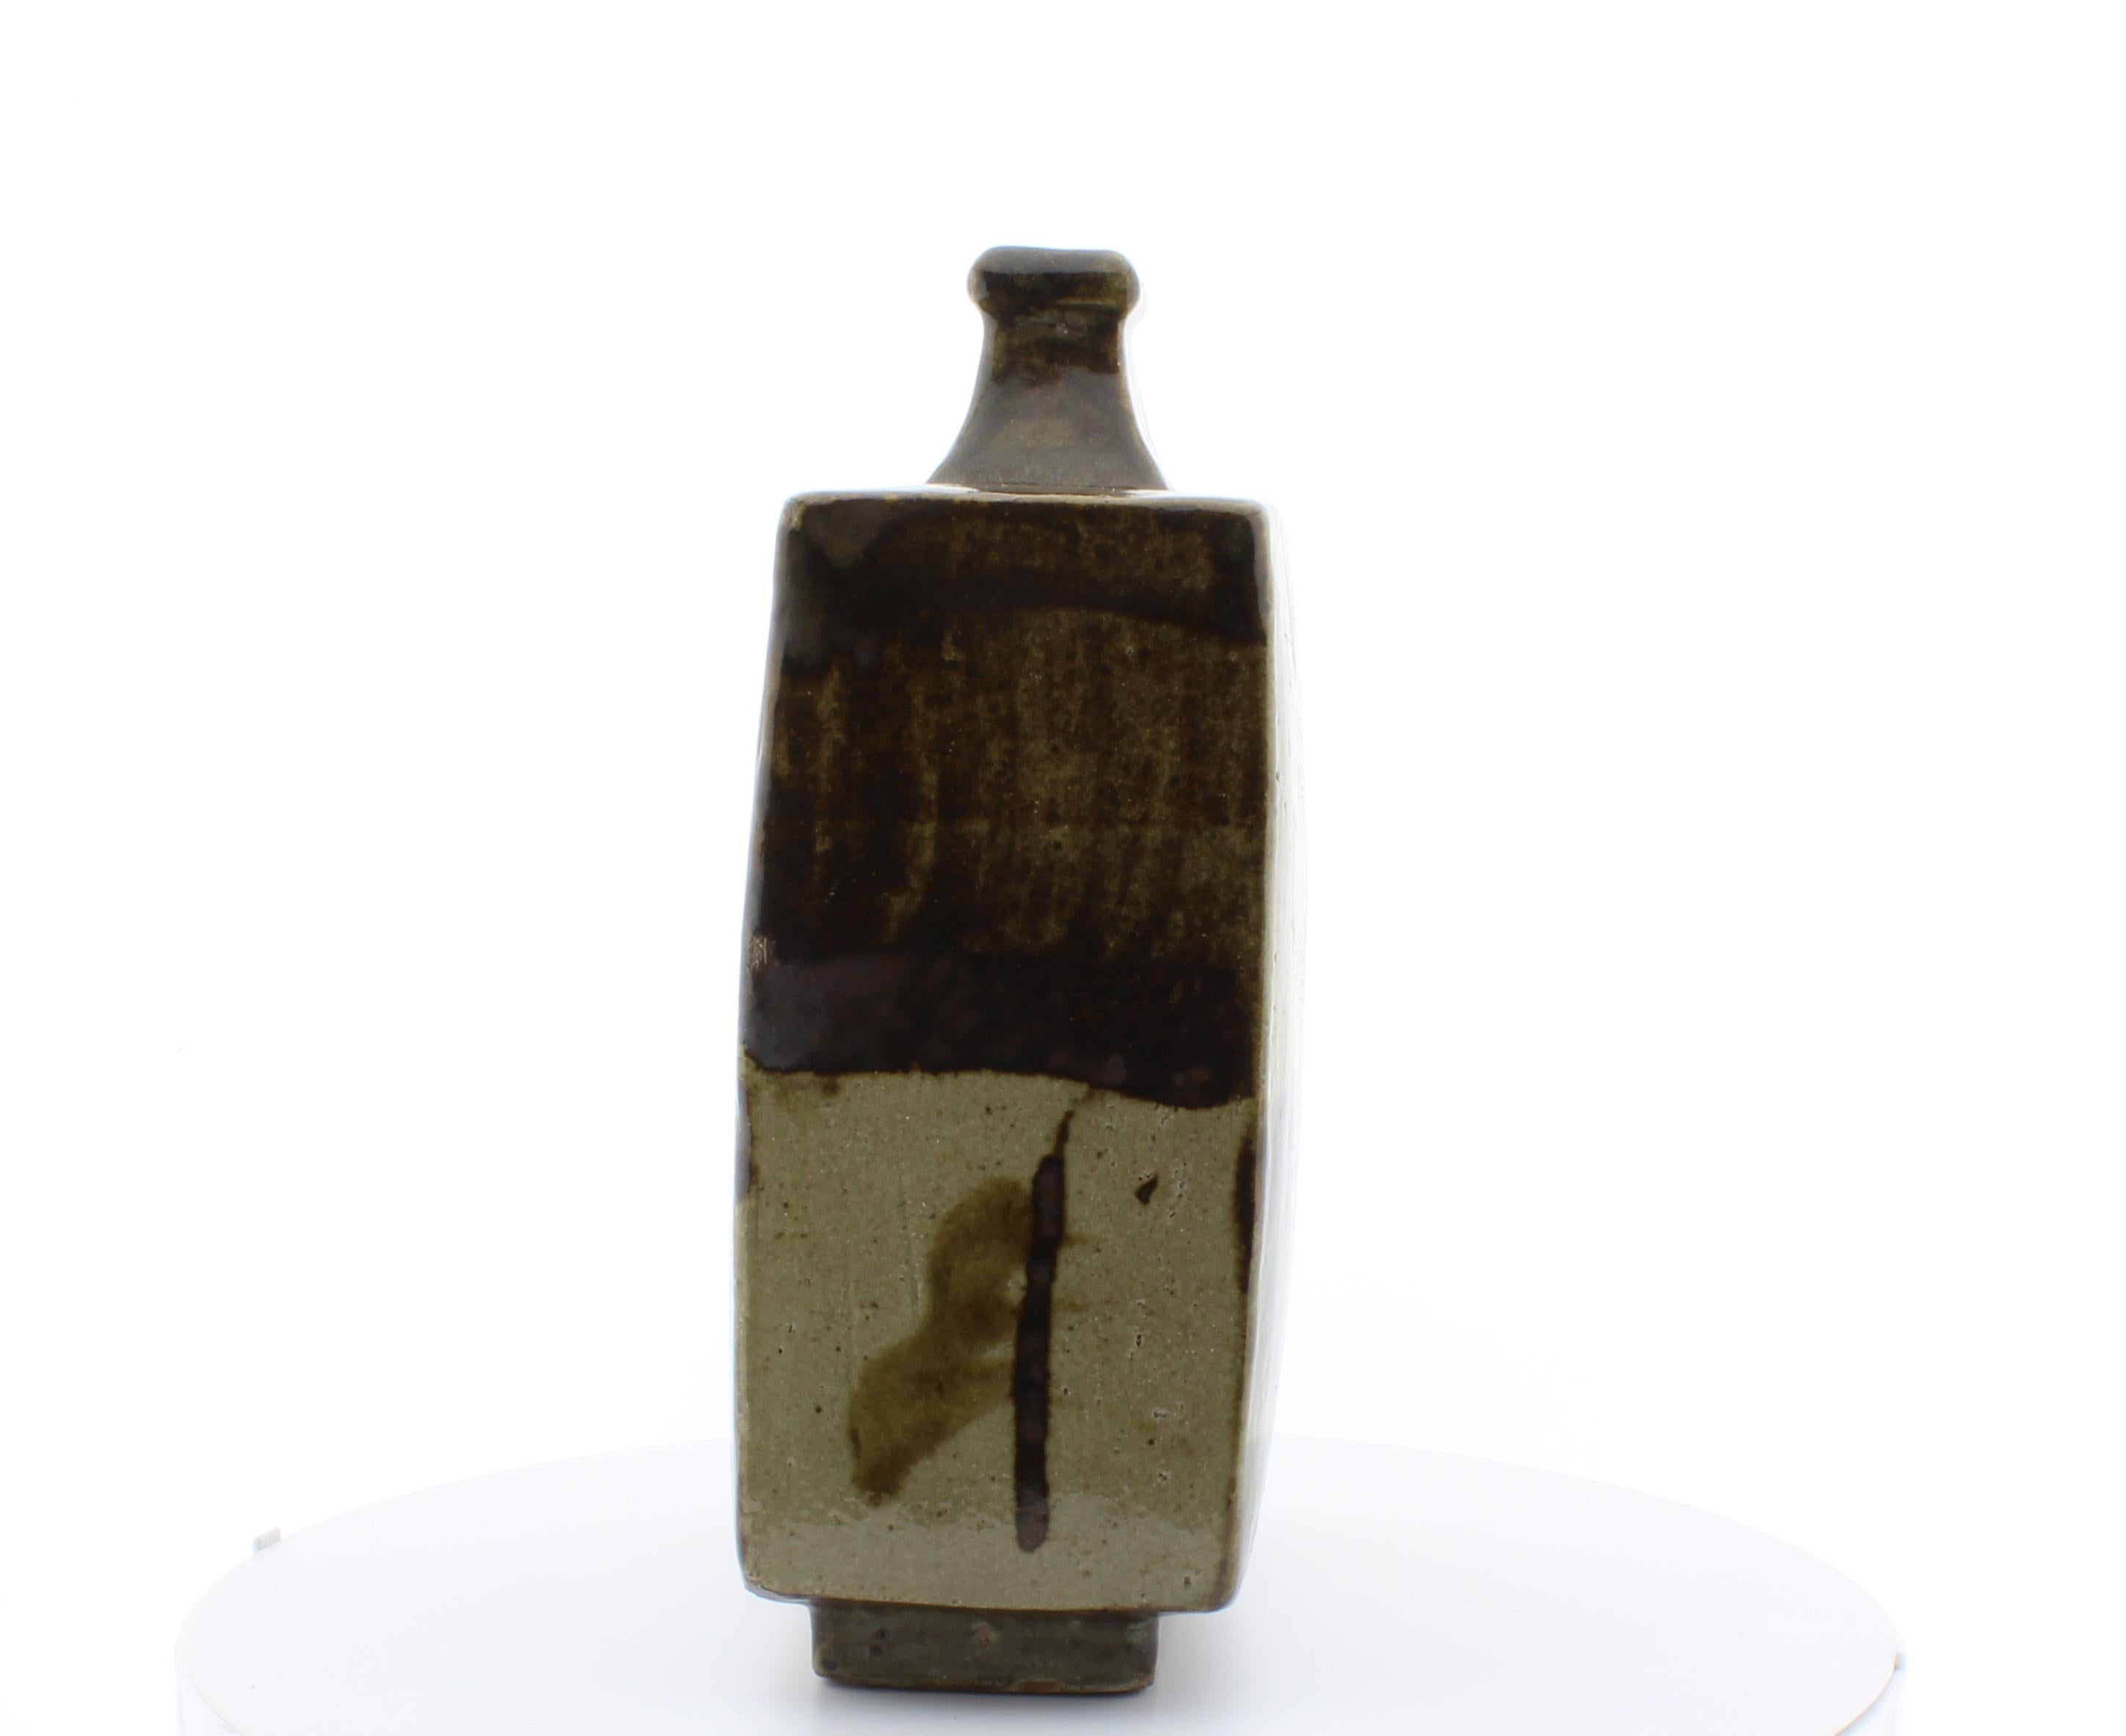  20th Century Japanese Earthenware Bottle by Hamada Shoji, Natural Earthy Colour For Sale 1